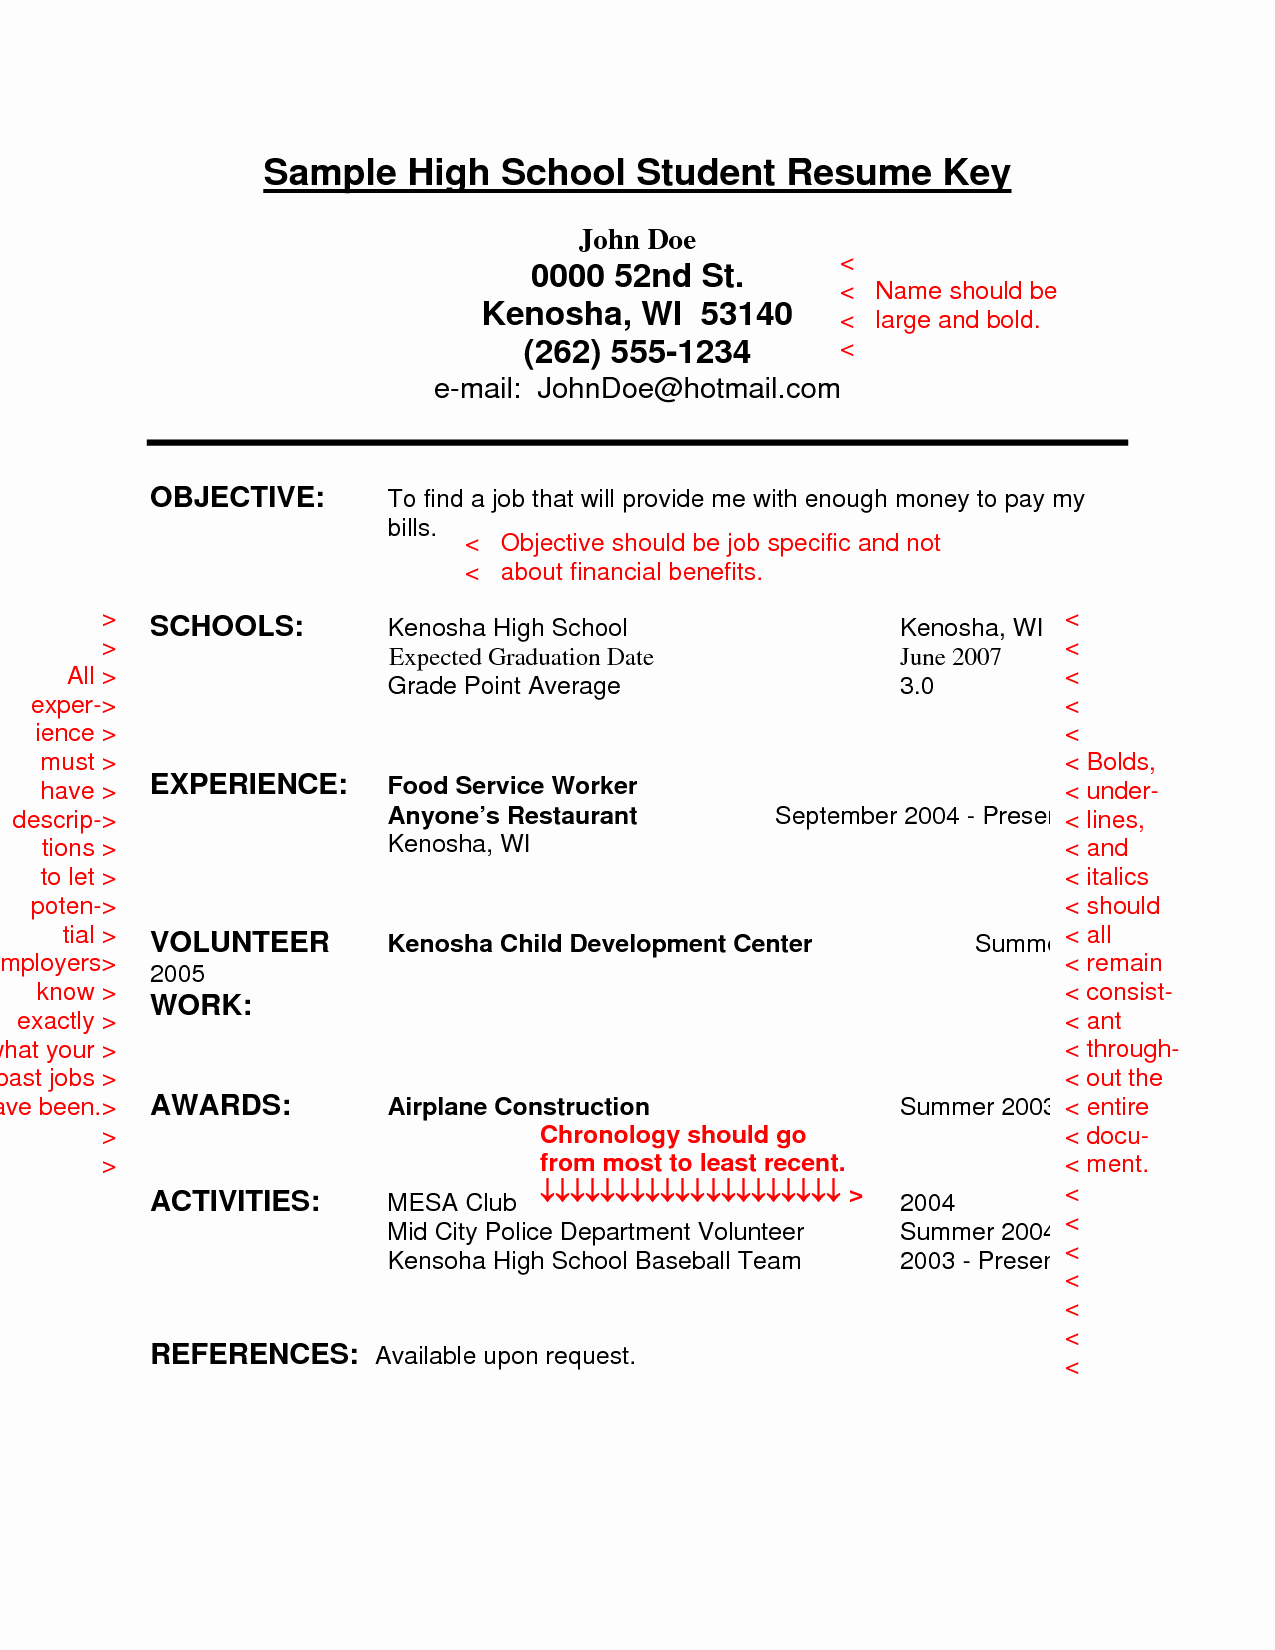 Resume Sample for High School Students with No Experience